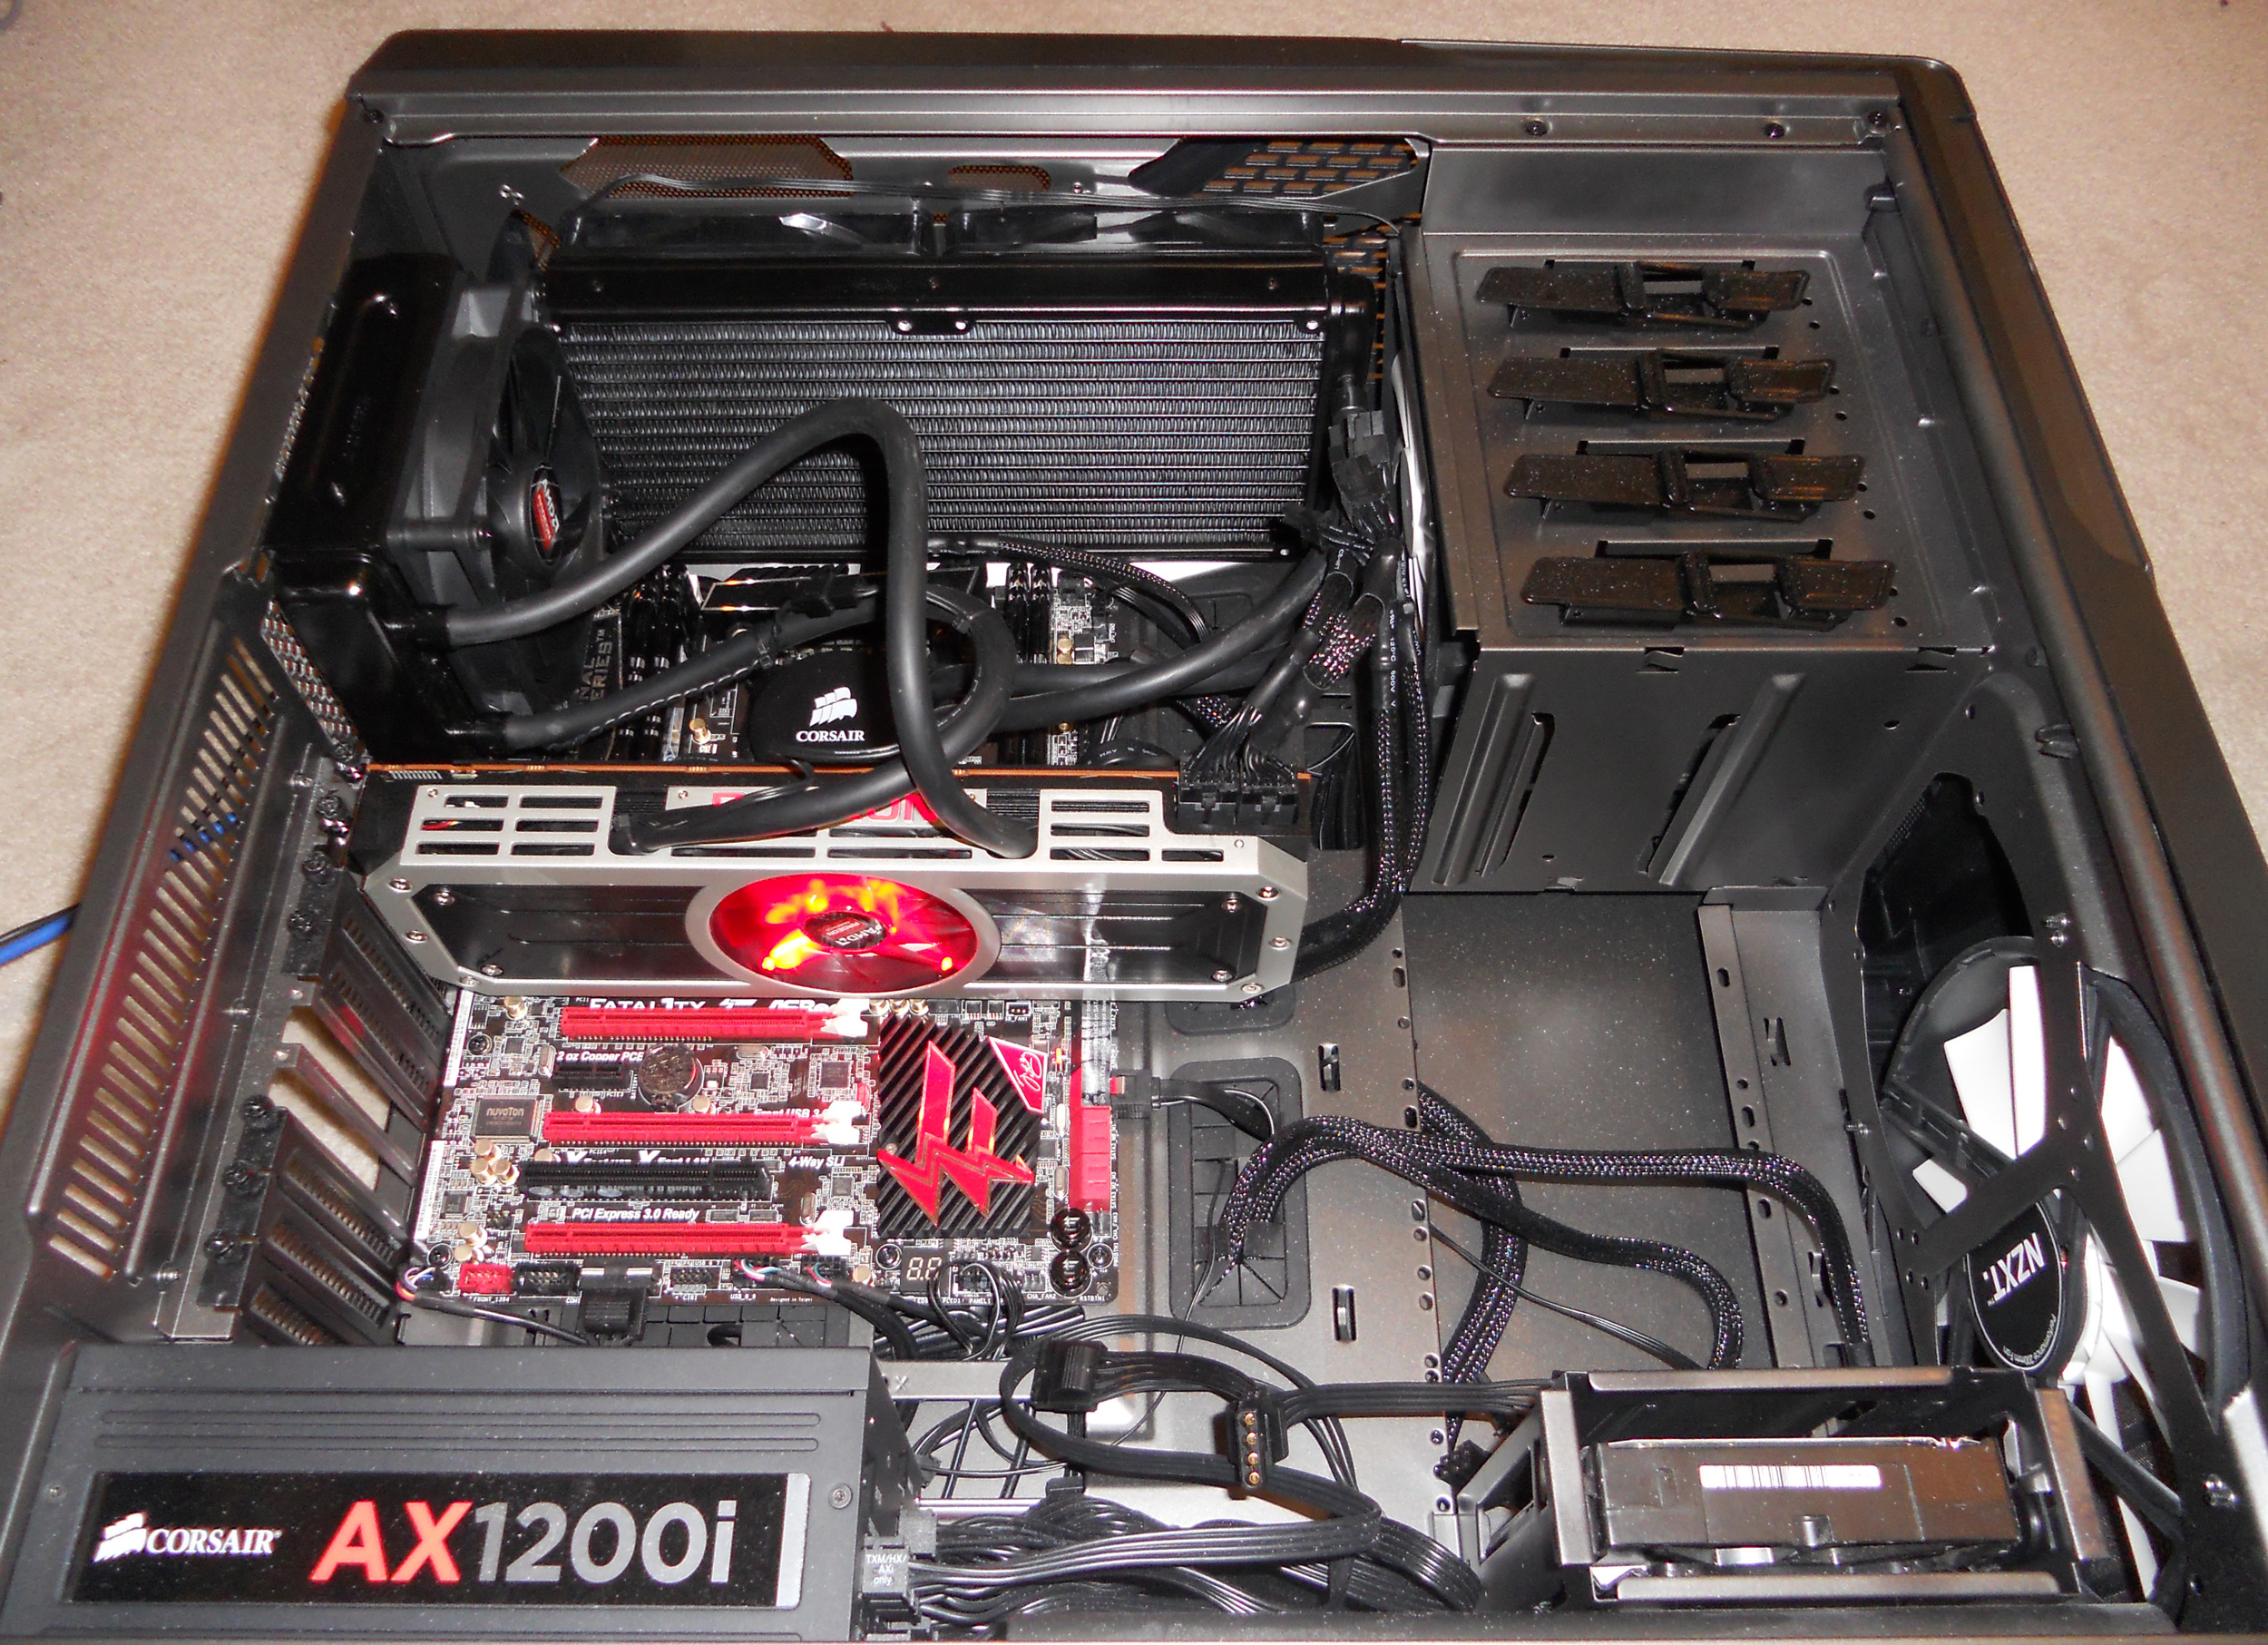 The Test - The AMD Radeon R9 295X2 Review